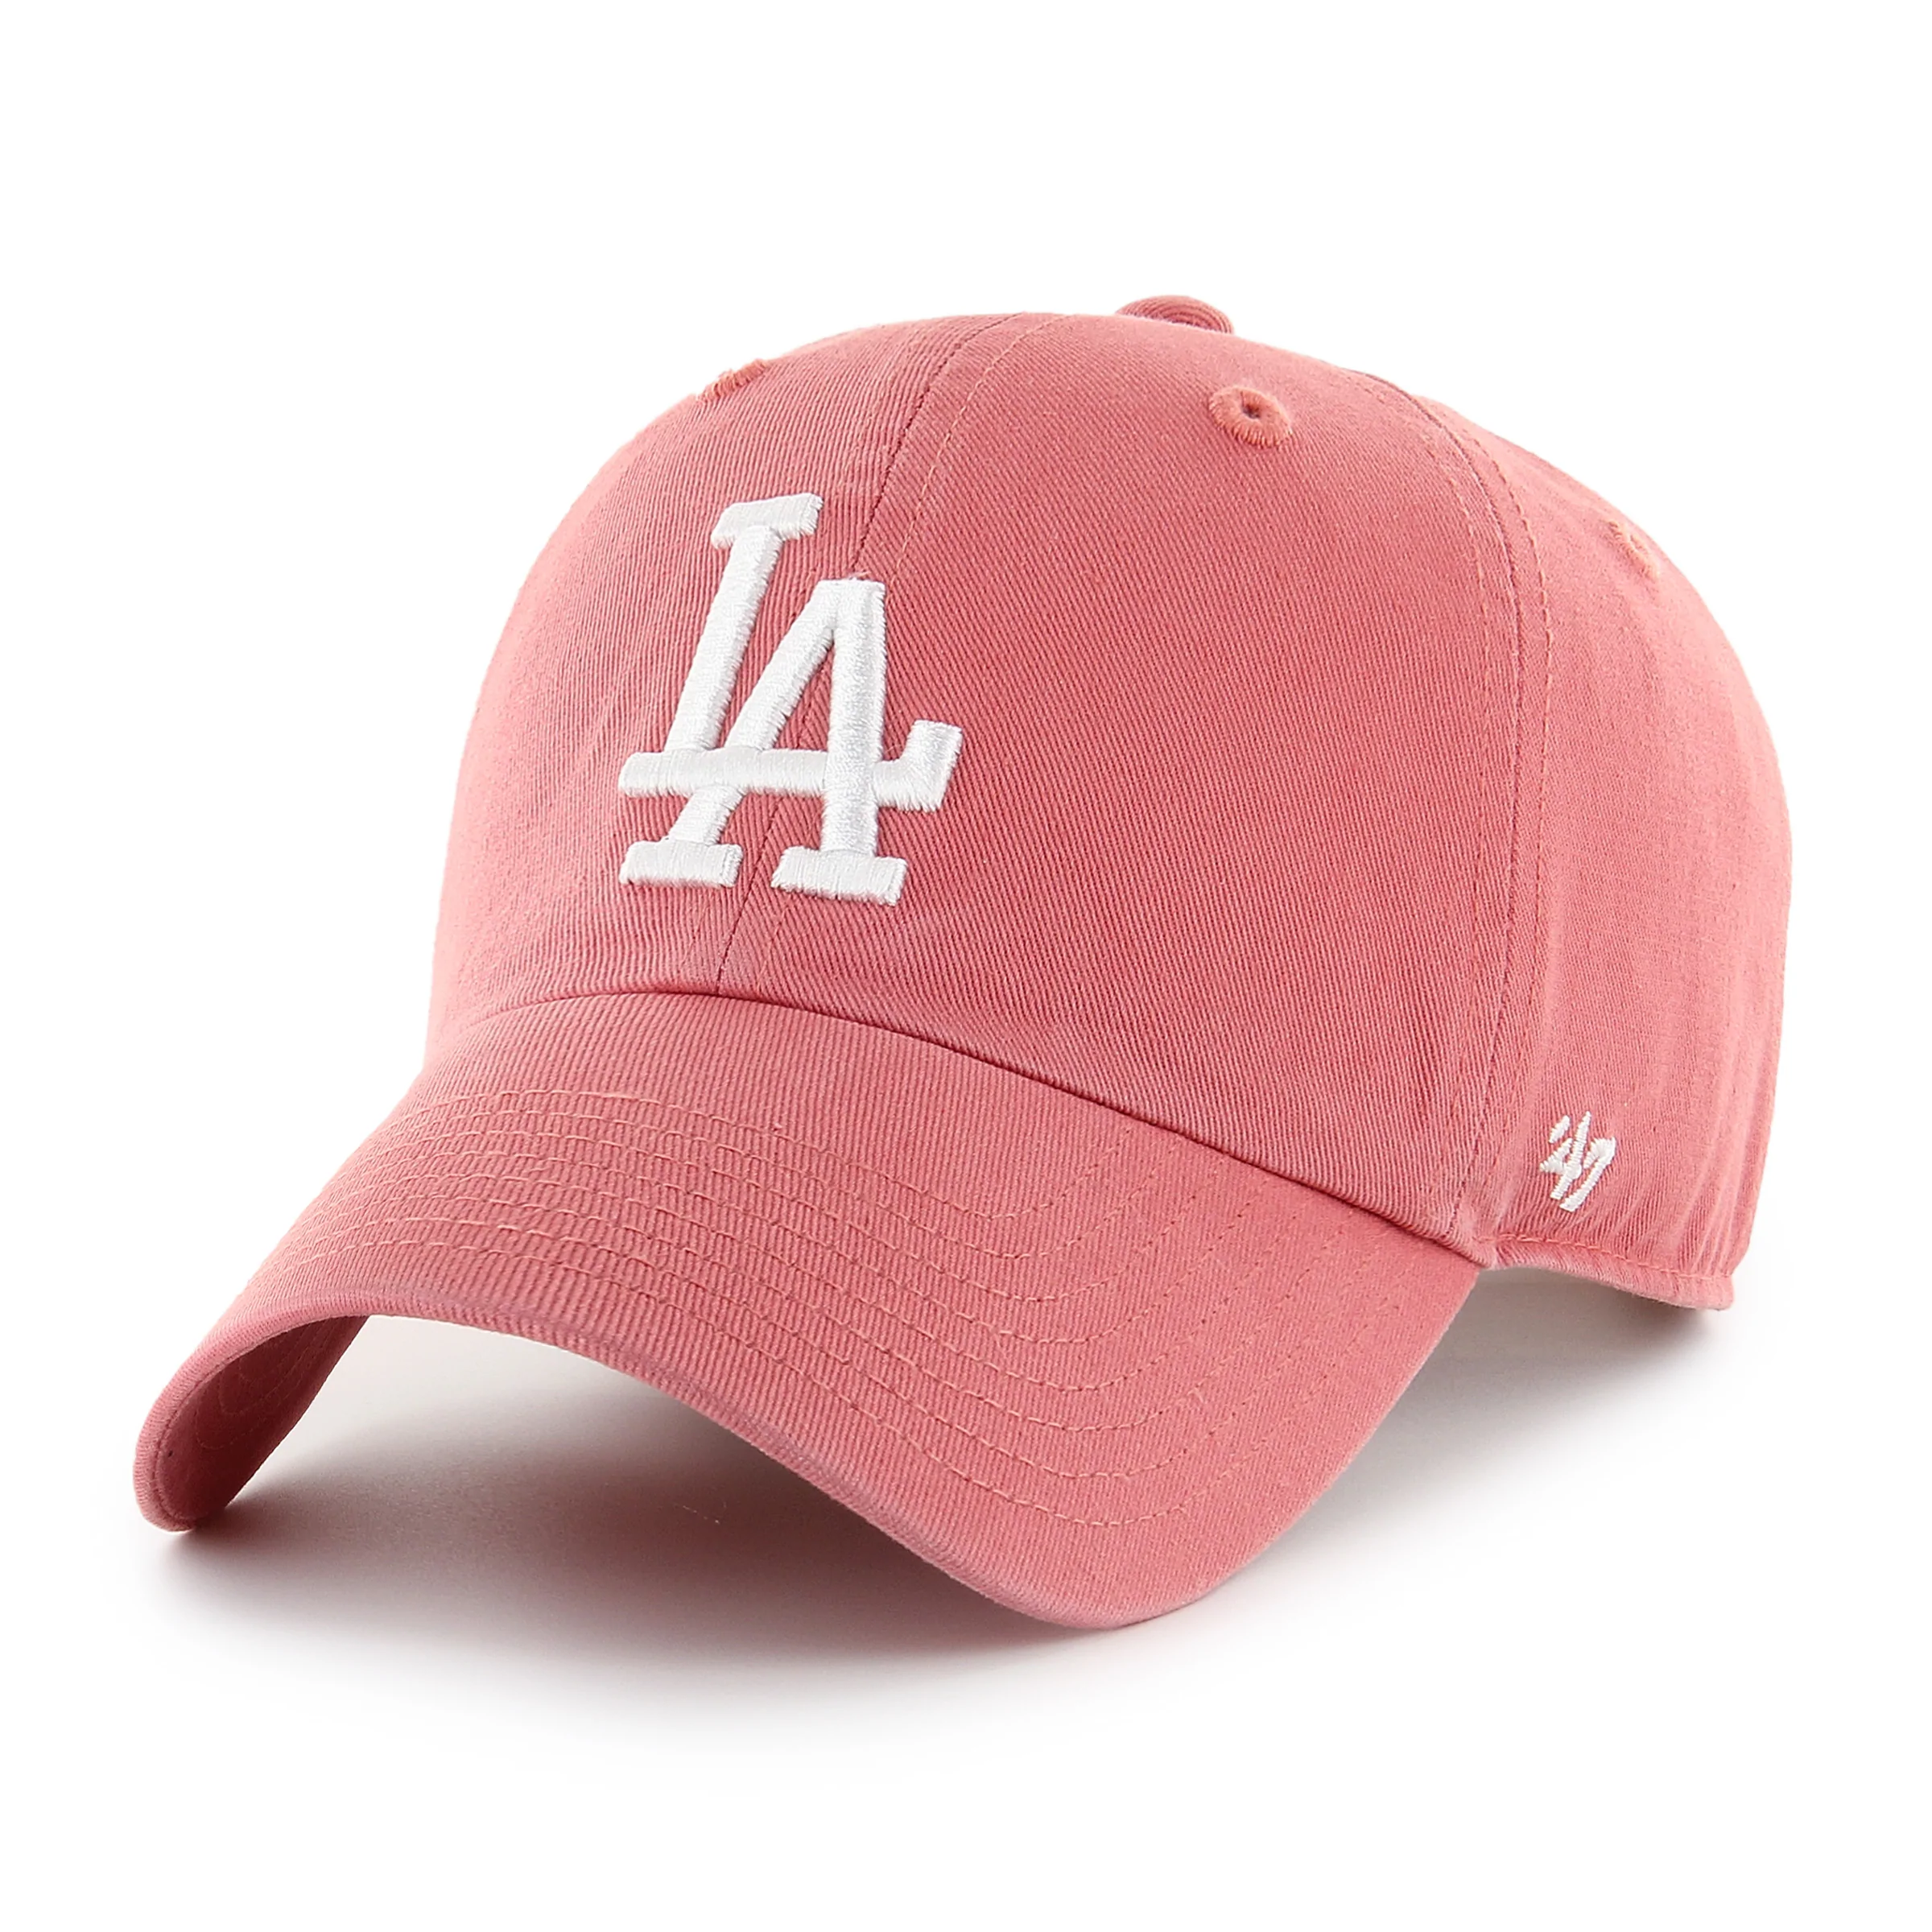 Officially Licensed MLB Aliquippa Adjustable Hat - Los Angeles Dodgers